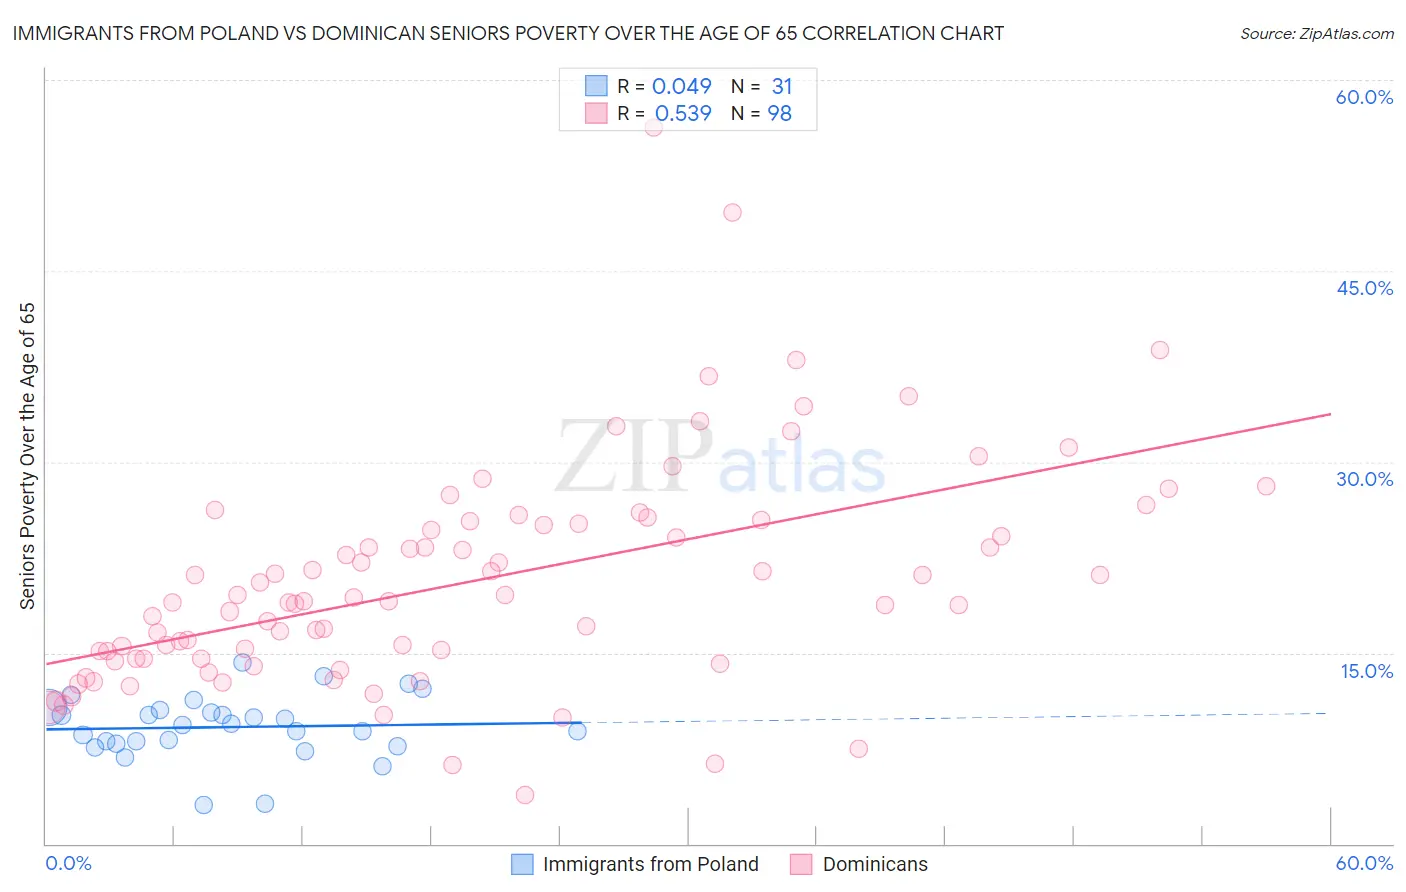 Immigrants from Poland vs Dominican Seniors Poverty Over the Age of 65